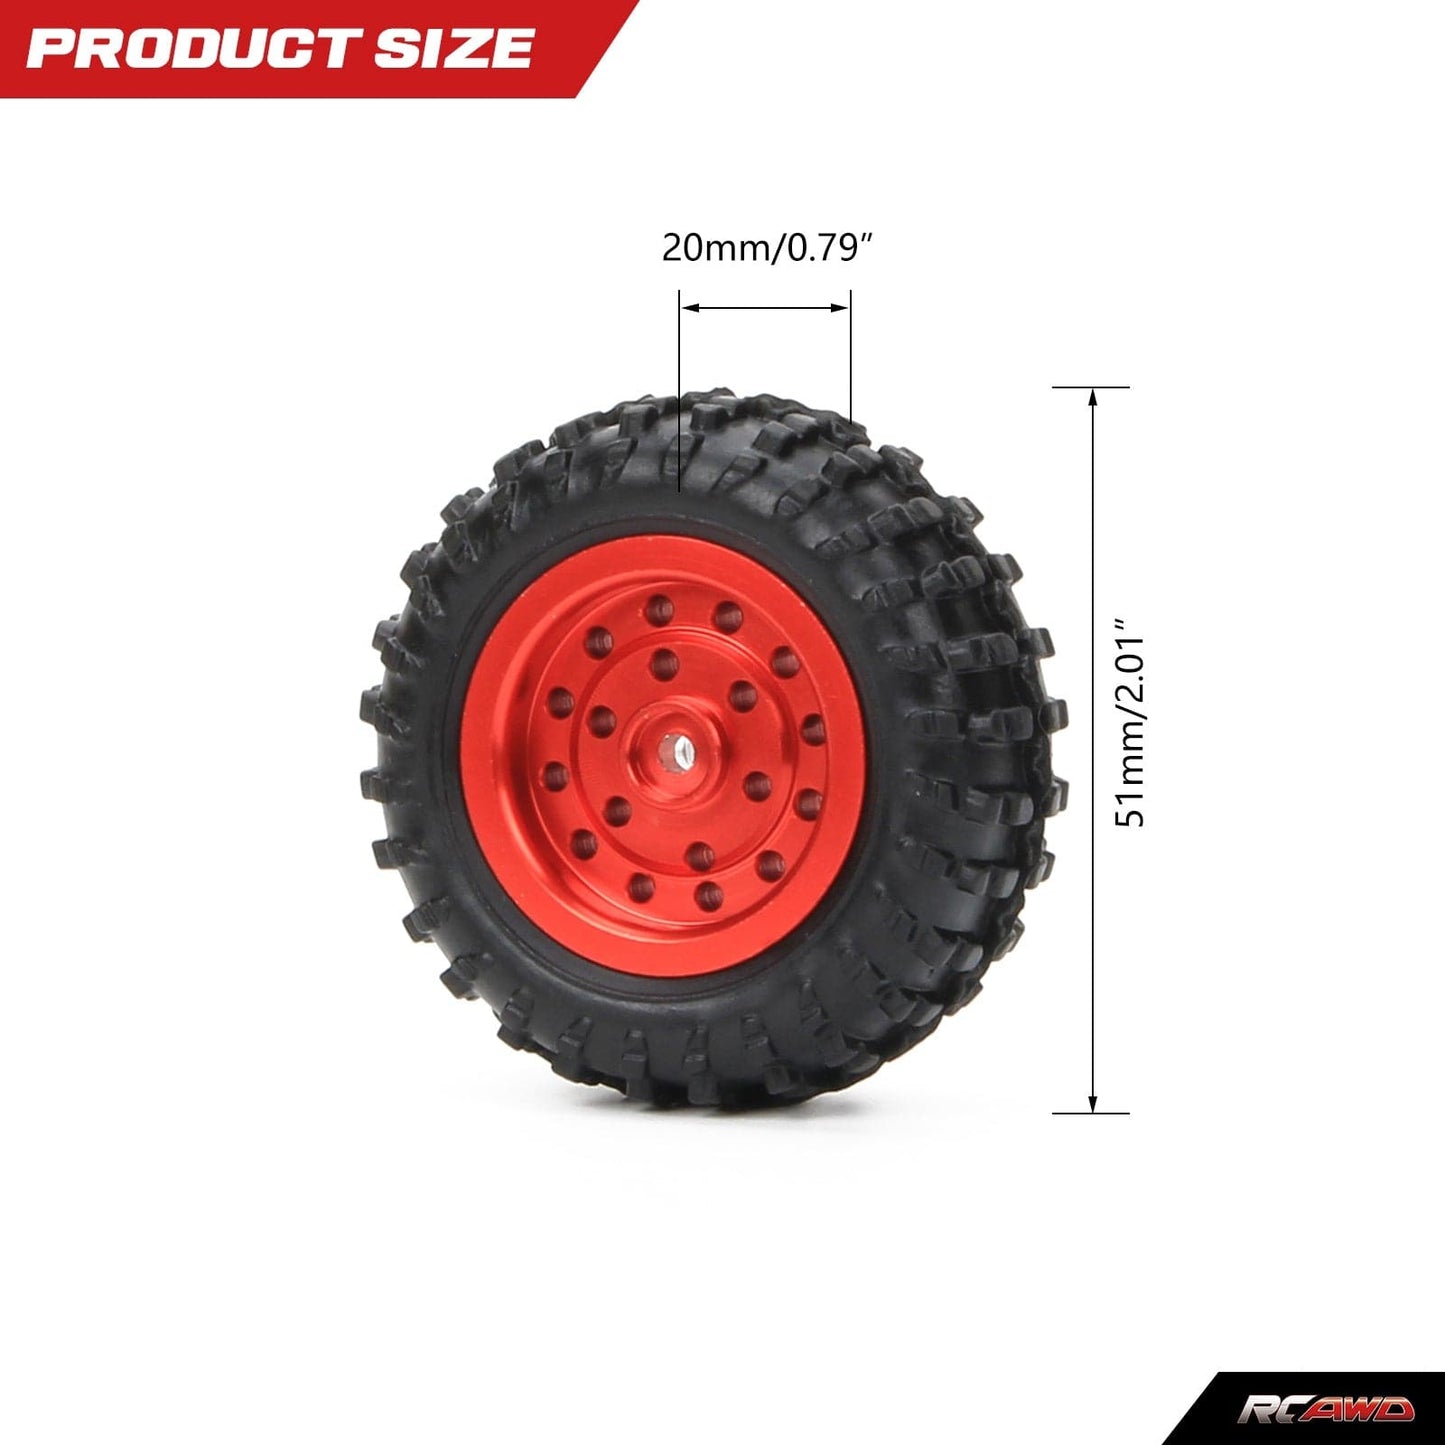 RCAWD WPL D12 18-holes Style RCAWD Upgrades 50mm 18-holes Style Alloy Wheel Rubber Tire for RC WPL D12 Drift Truck